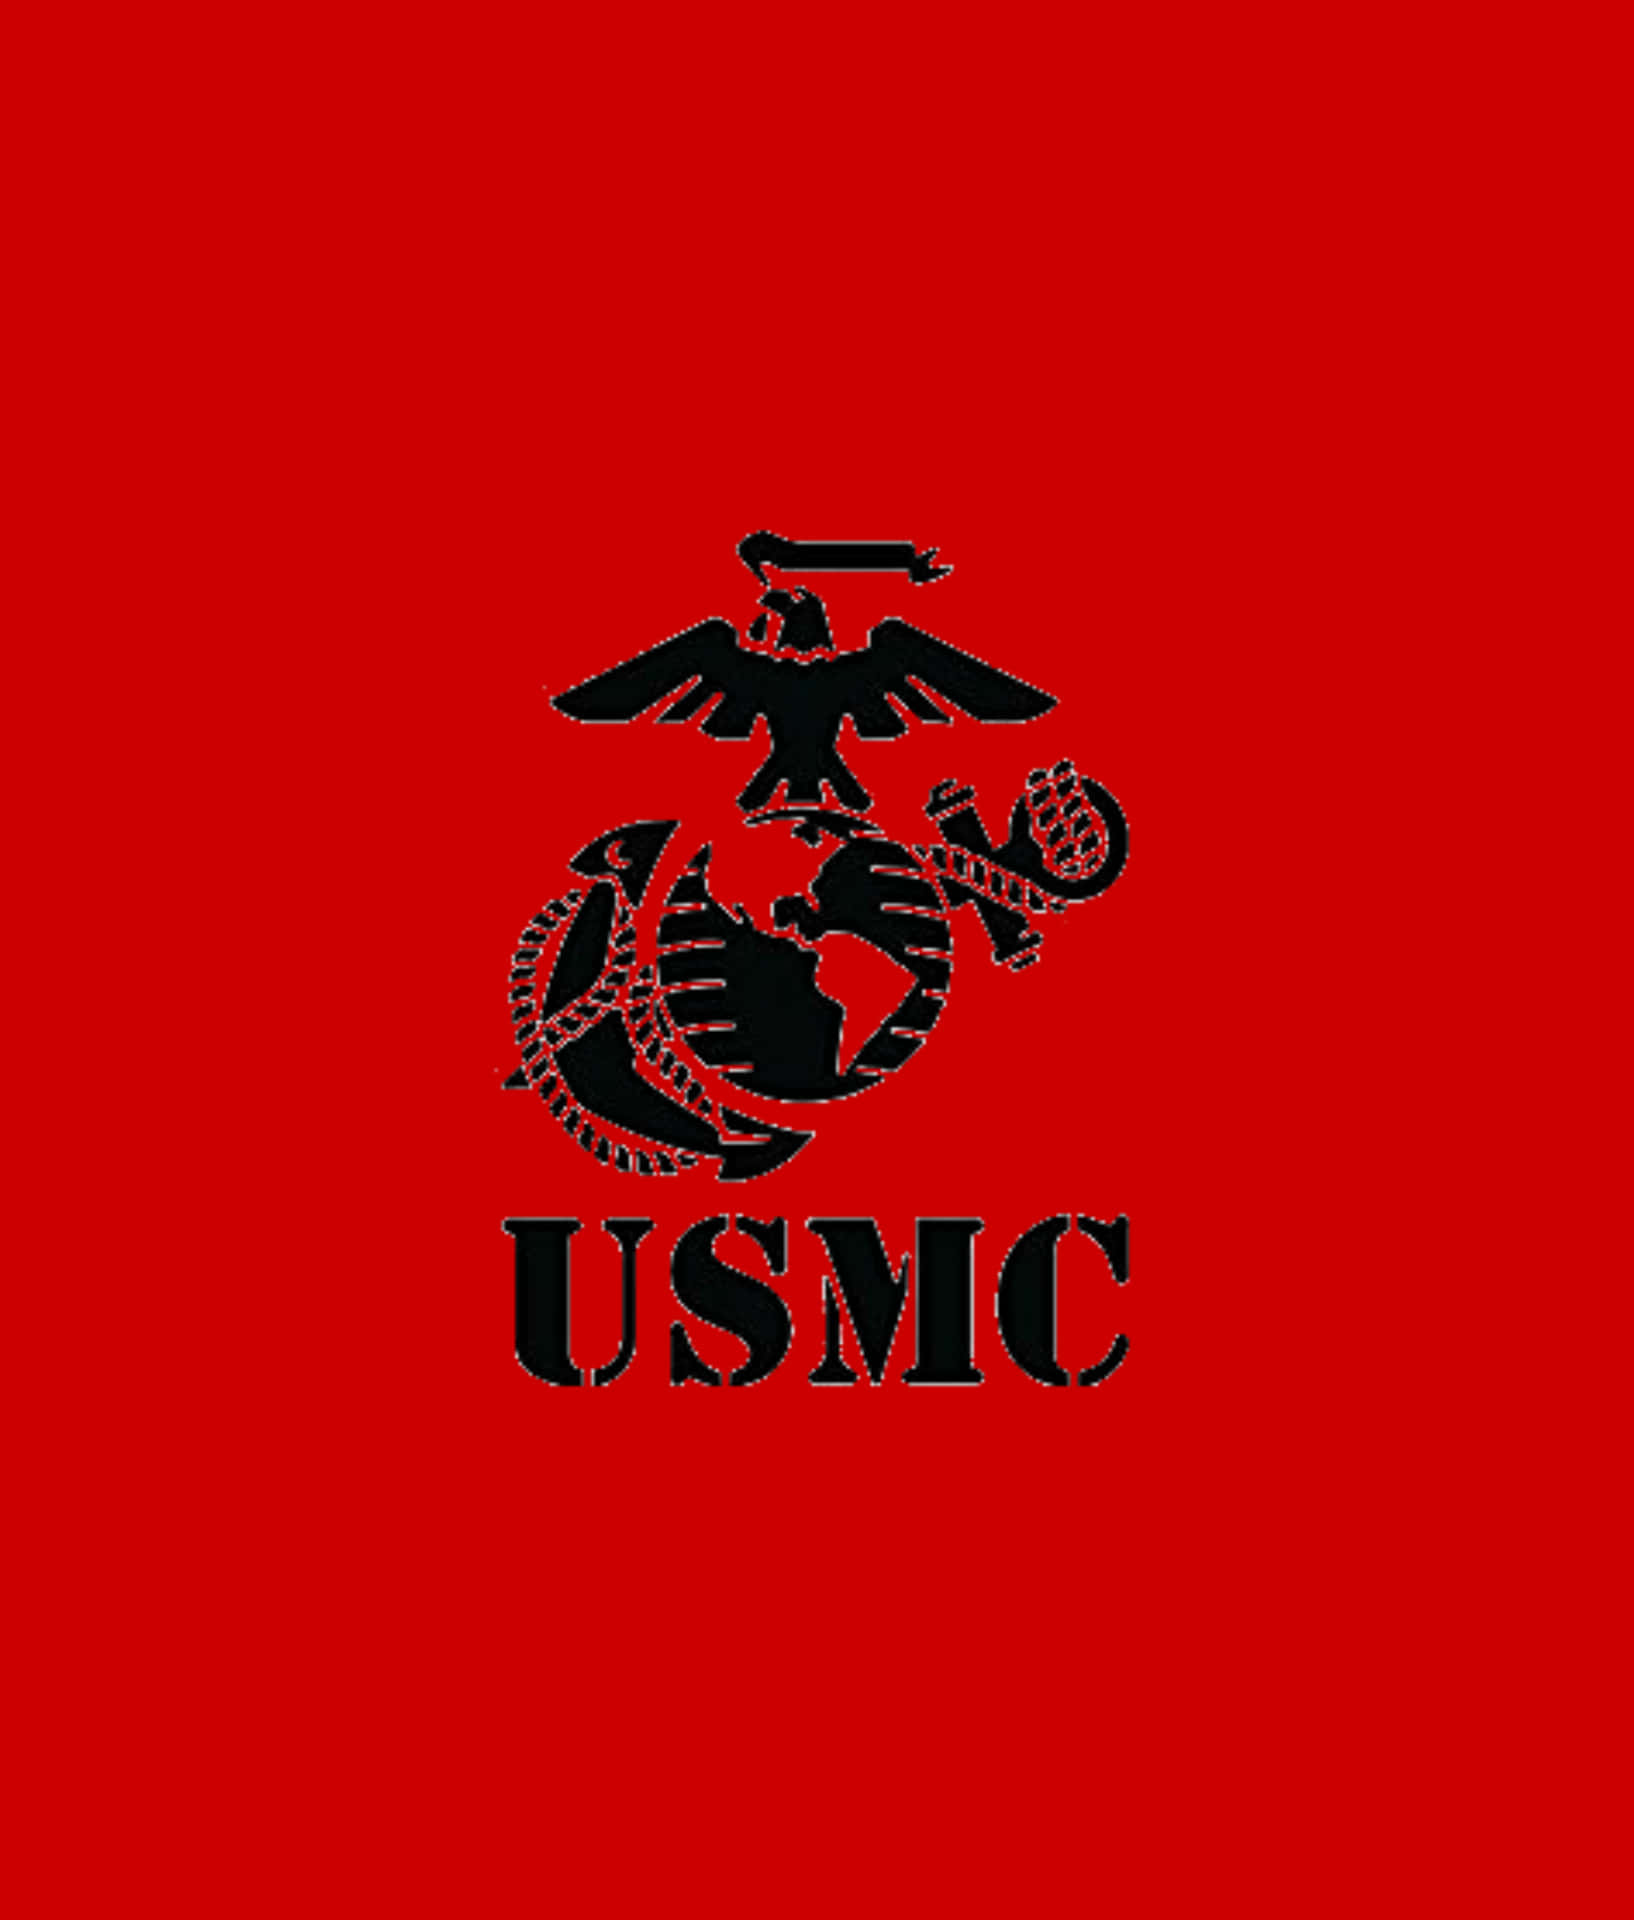 United States Marine Corps Bravely Serving the Nation Wallpaper